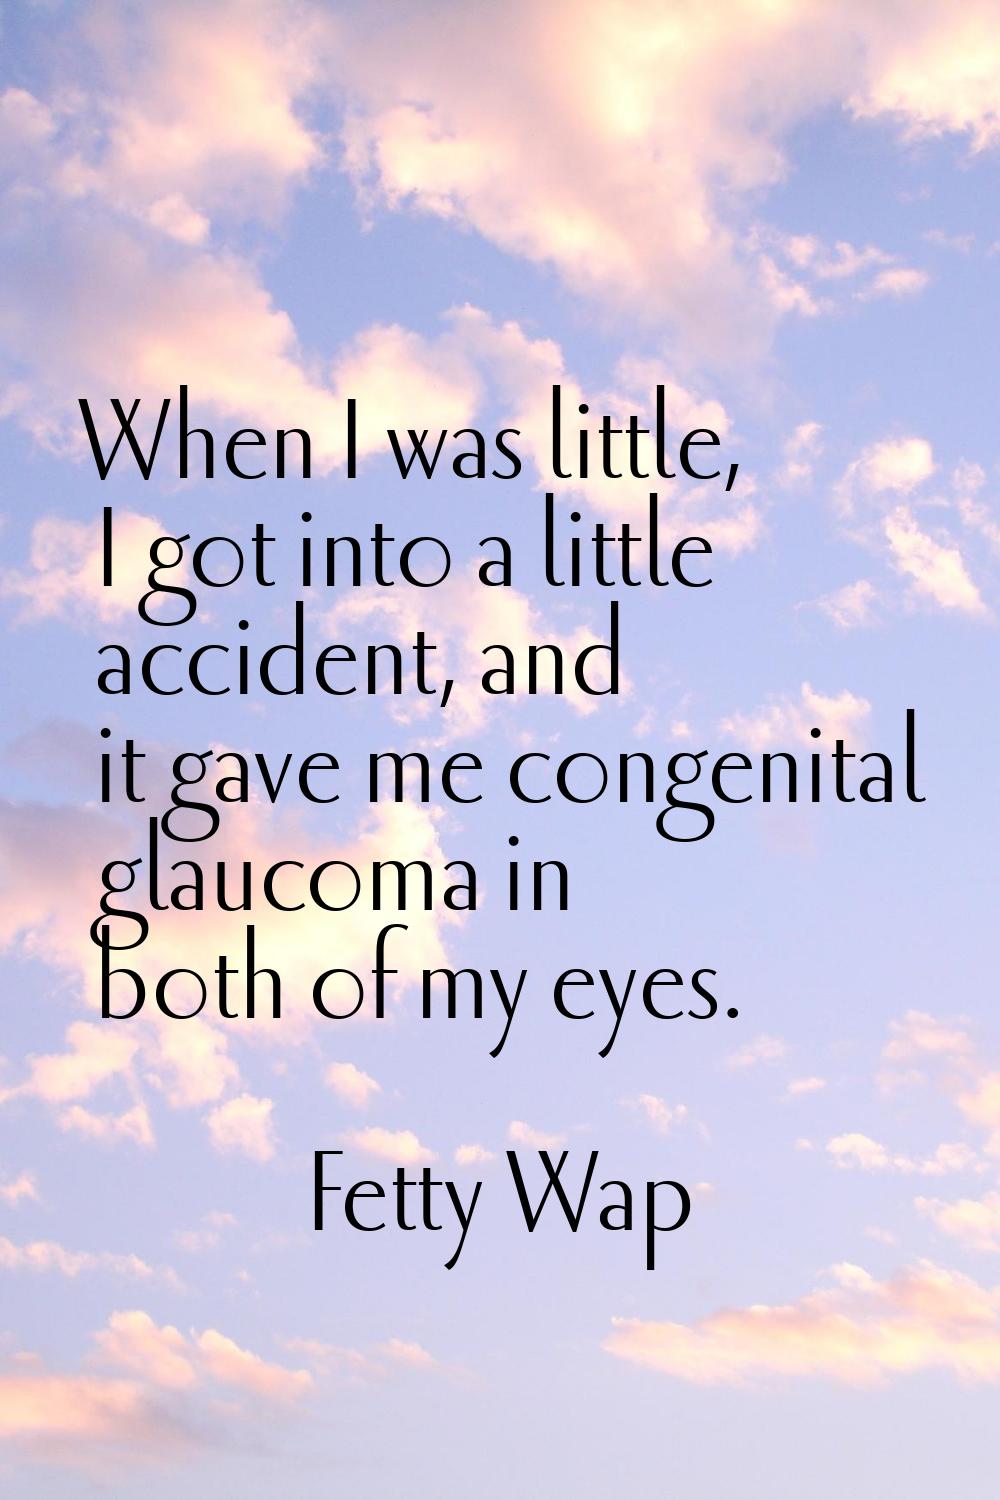 When I was little, I got into a little accident, and it gave me congenital glaucoma in both of my e